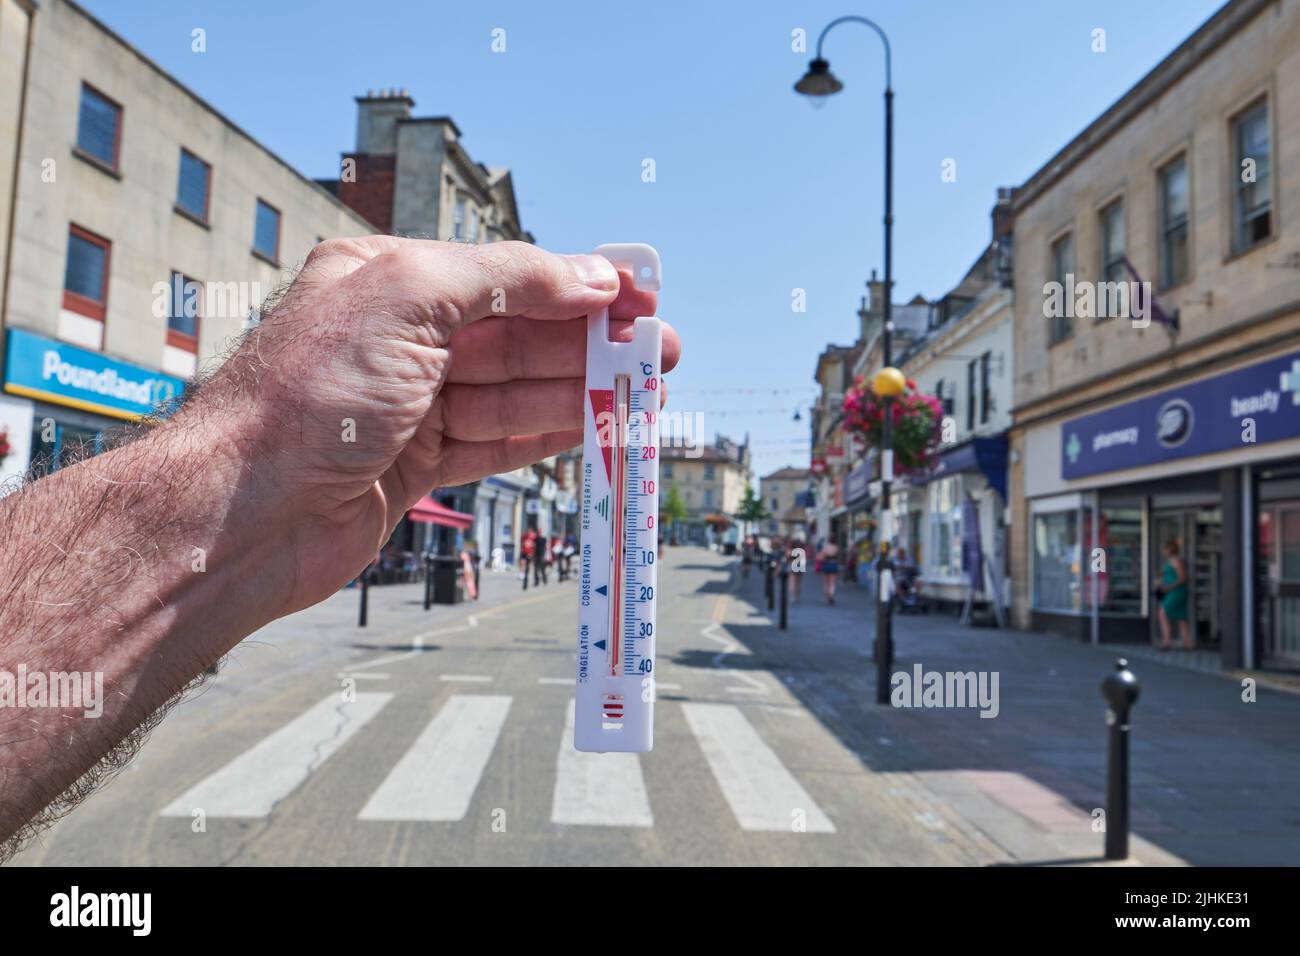 Chippenham, Wiltshire, UK, 19th July, 2022. As the UK reports its highest-ever temperature, breaching 40°C for the first time. The High Street in Chippenham, Wiltshire is quiet on Tuesday afternoon as people heed Met office advice to stay indoors as the temperature peaks. Credit: Lynchpics/Alamy Live News Stock Photo